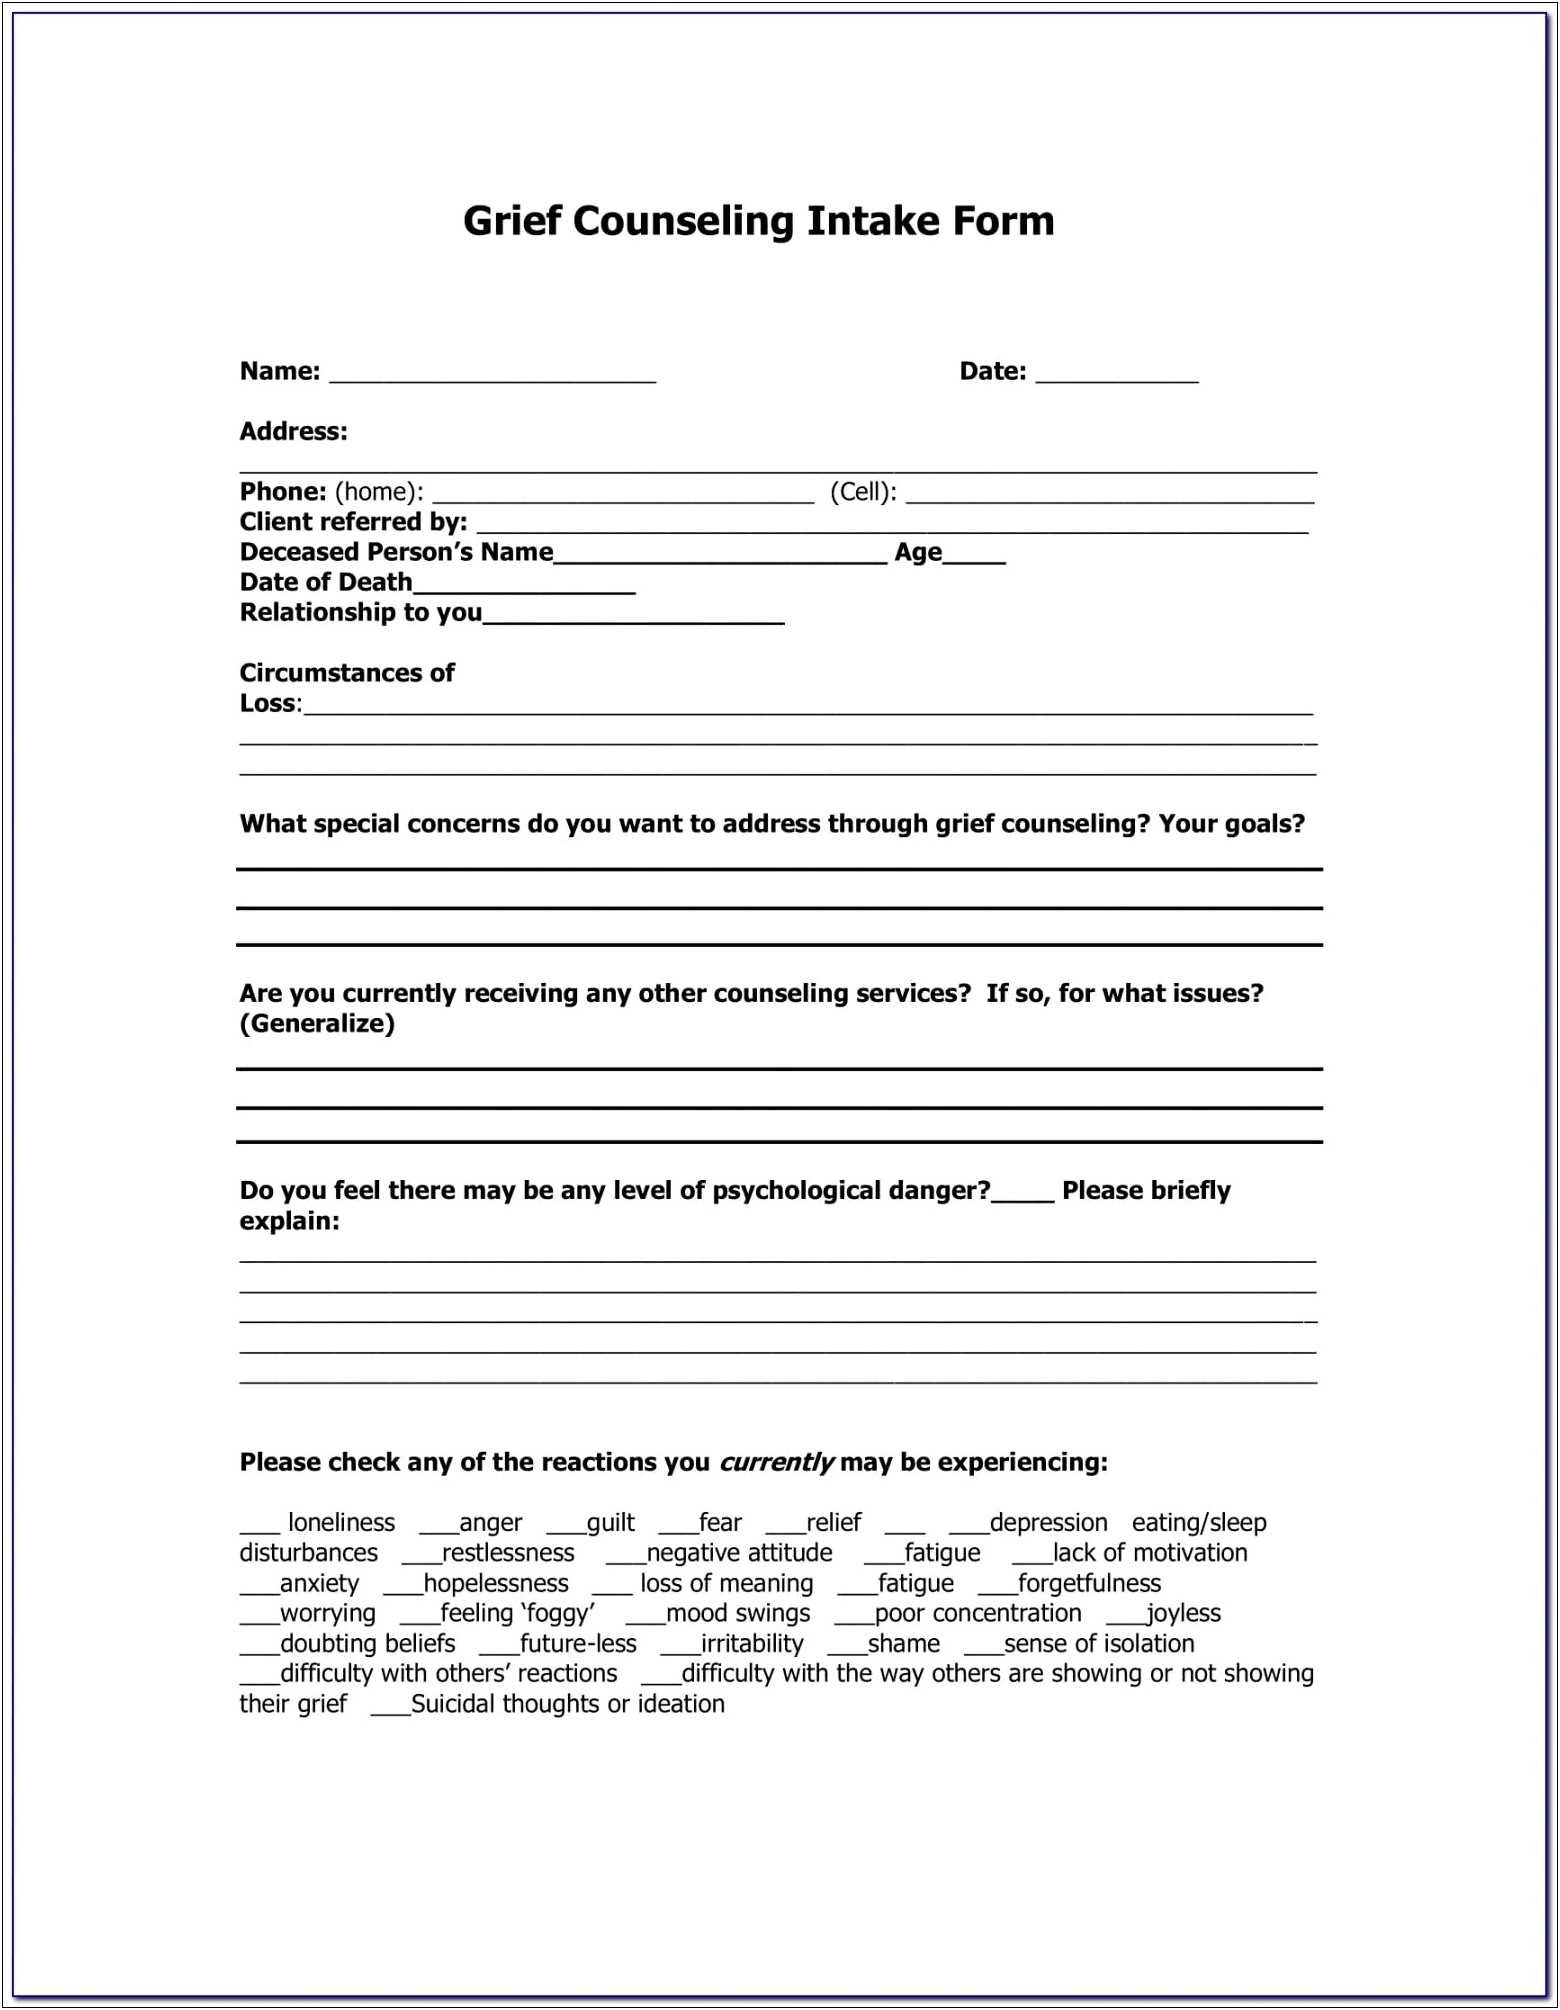 Free Marriage Counseling Certificate Of Completion Template